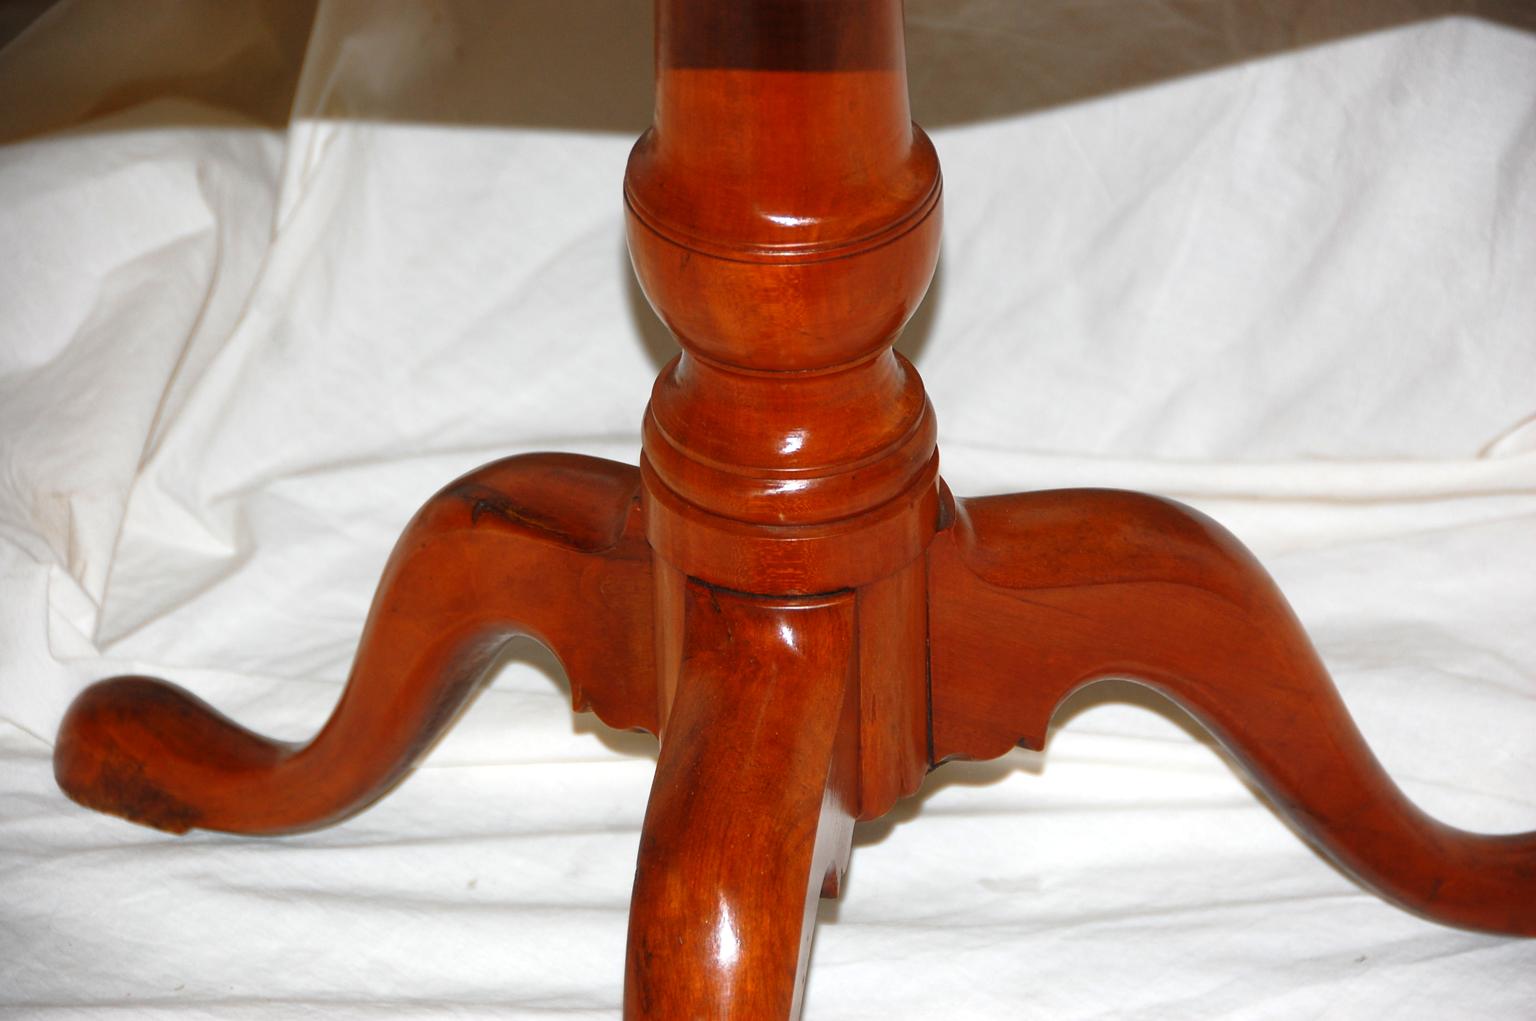 American 18th Century Federal Period Tripod Tilt-Top Table in Apple Wood In Good Condition For Sale In Wells, ME